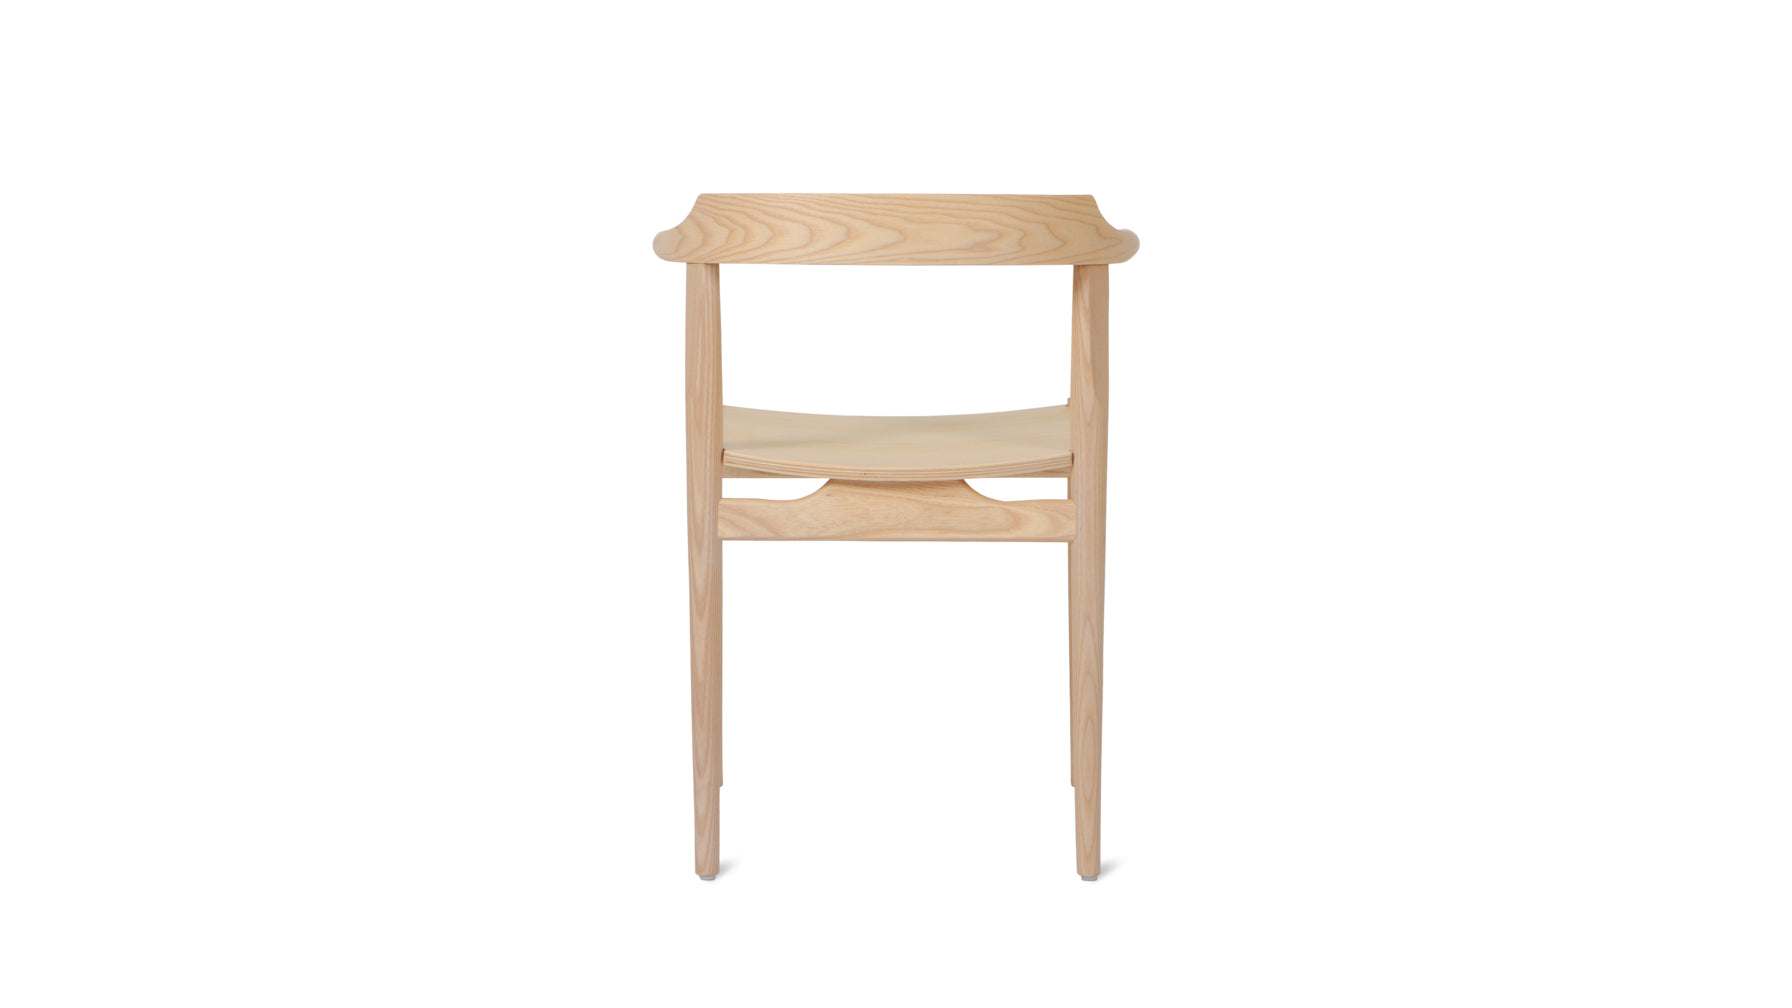 Tuck In Dining Chair, White Ash, Wood Seat - Image 5